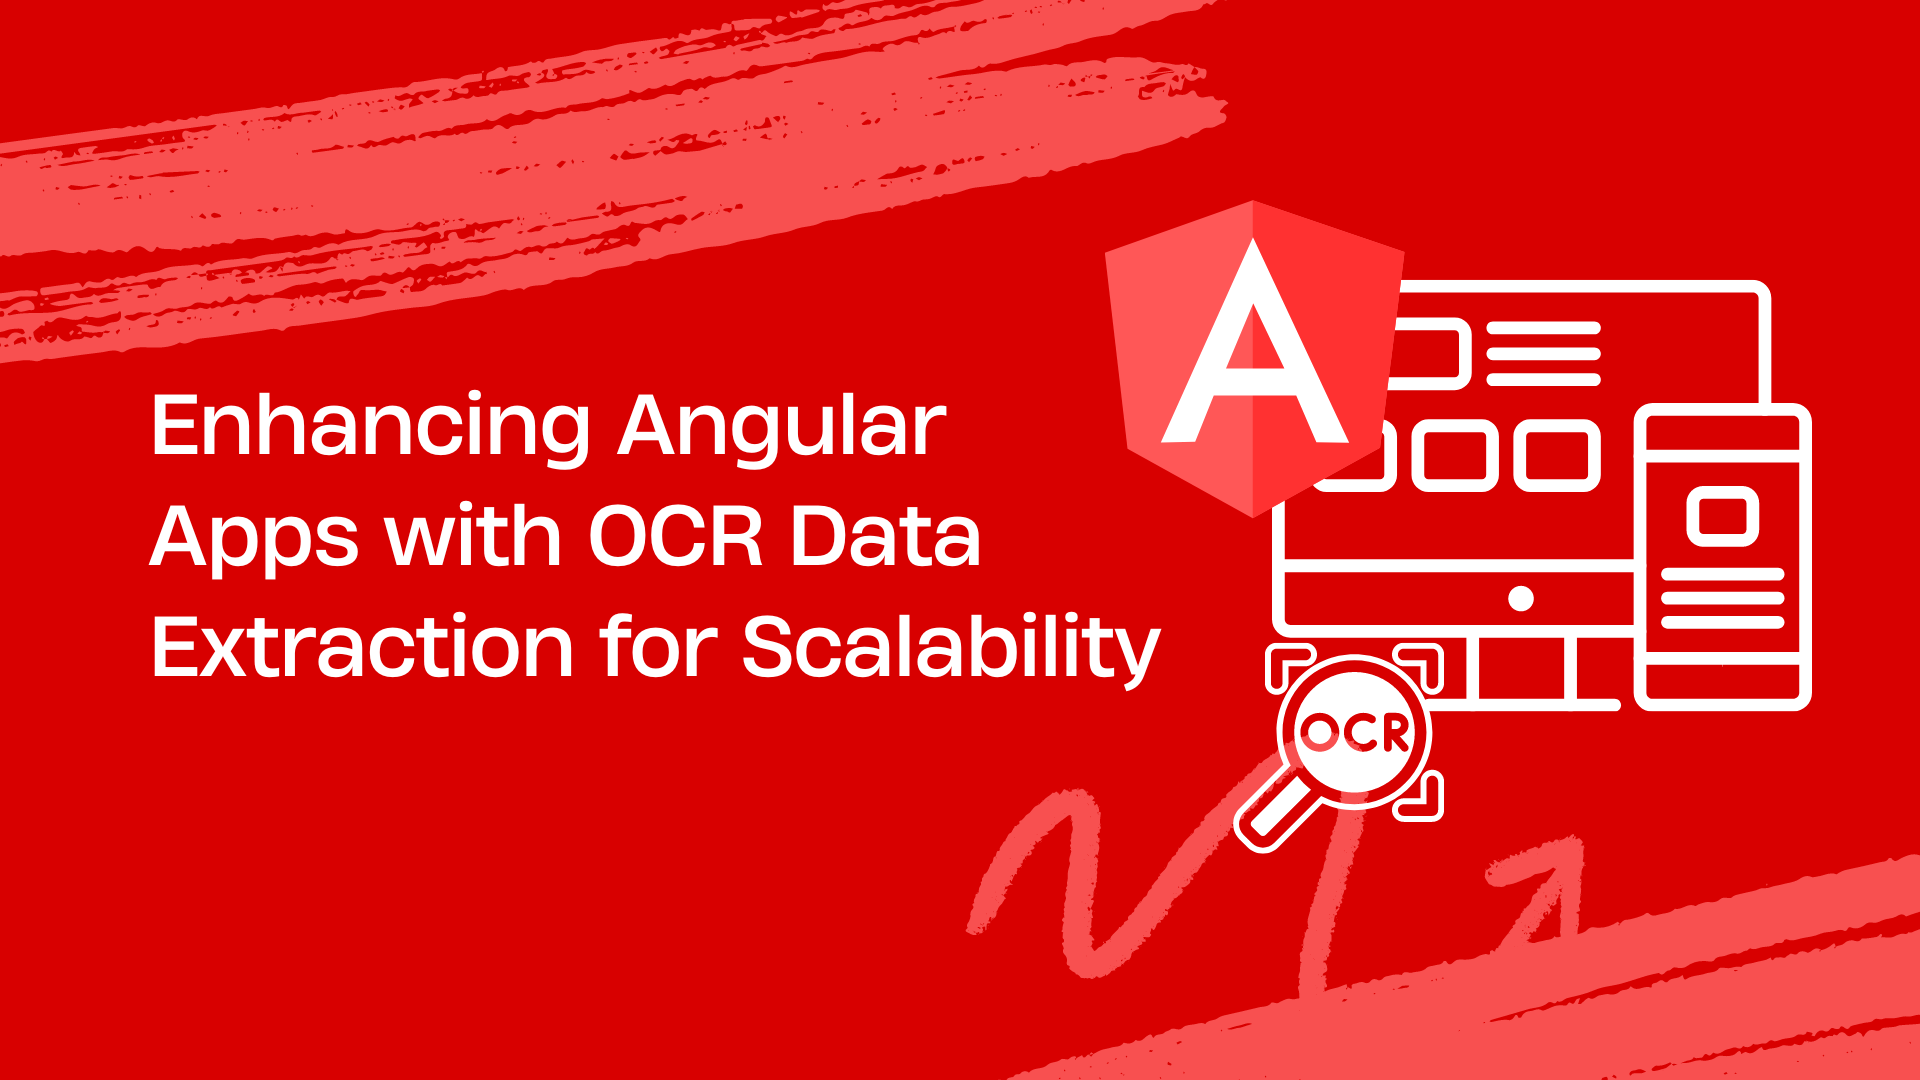 Enhancing Angular Apps with OCR Data Extraction for Scalability